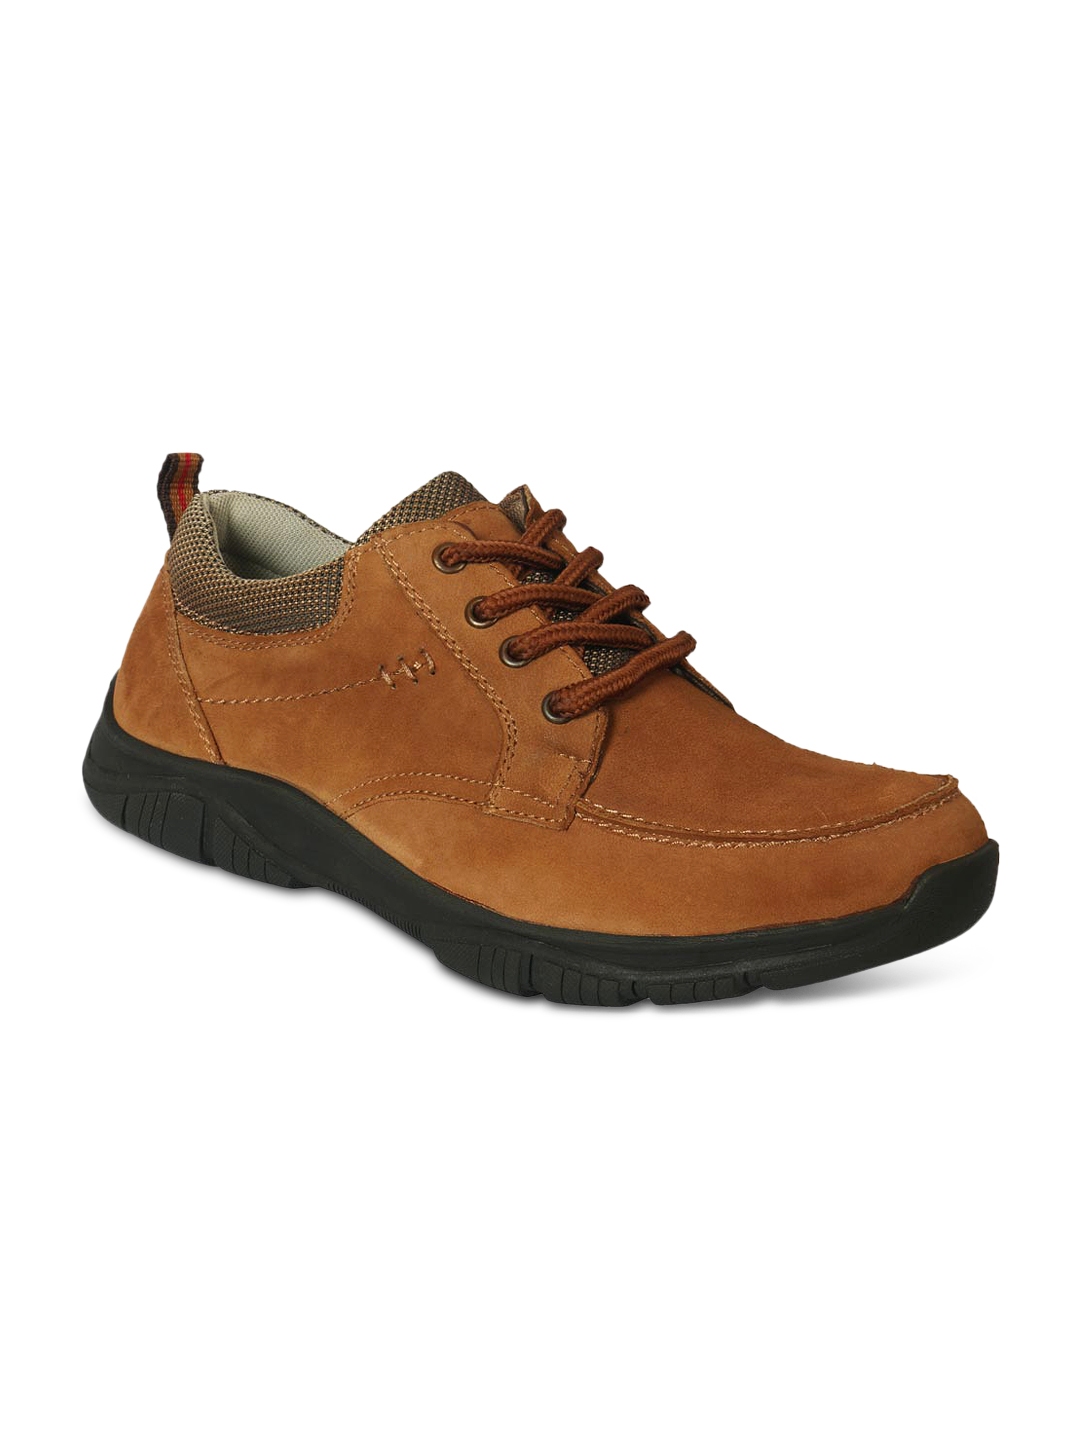 Buy Action Men Brown Leather Casual Shoes - Casual Shoes for Men ...